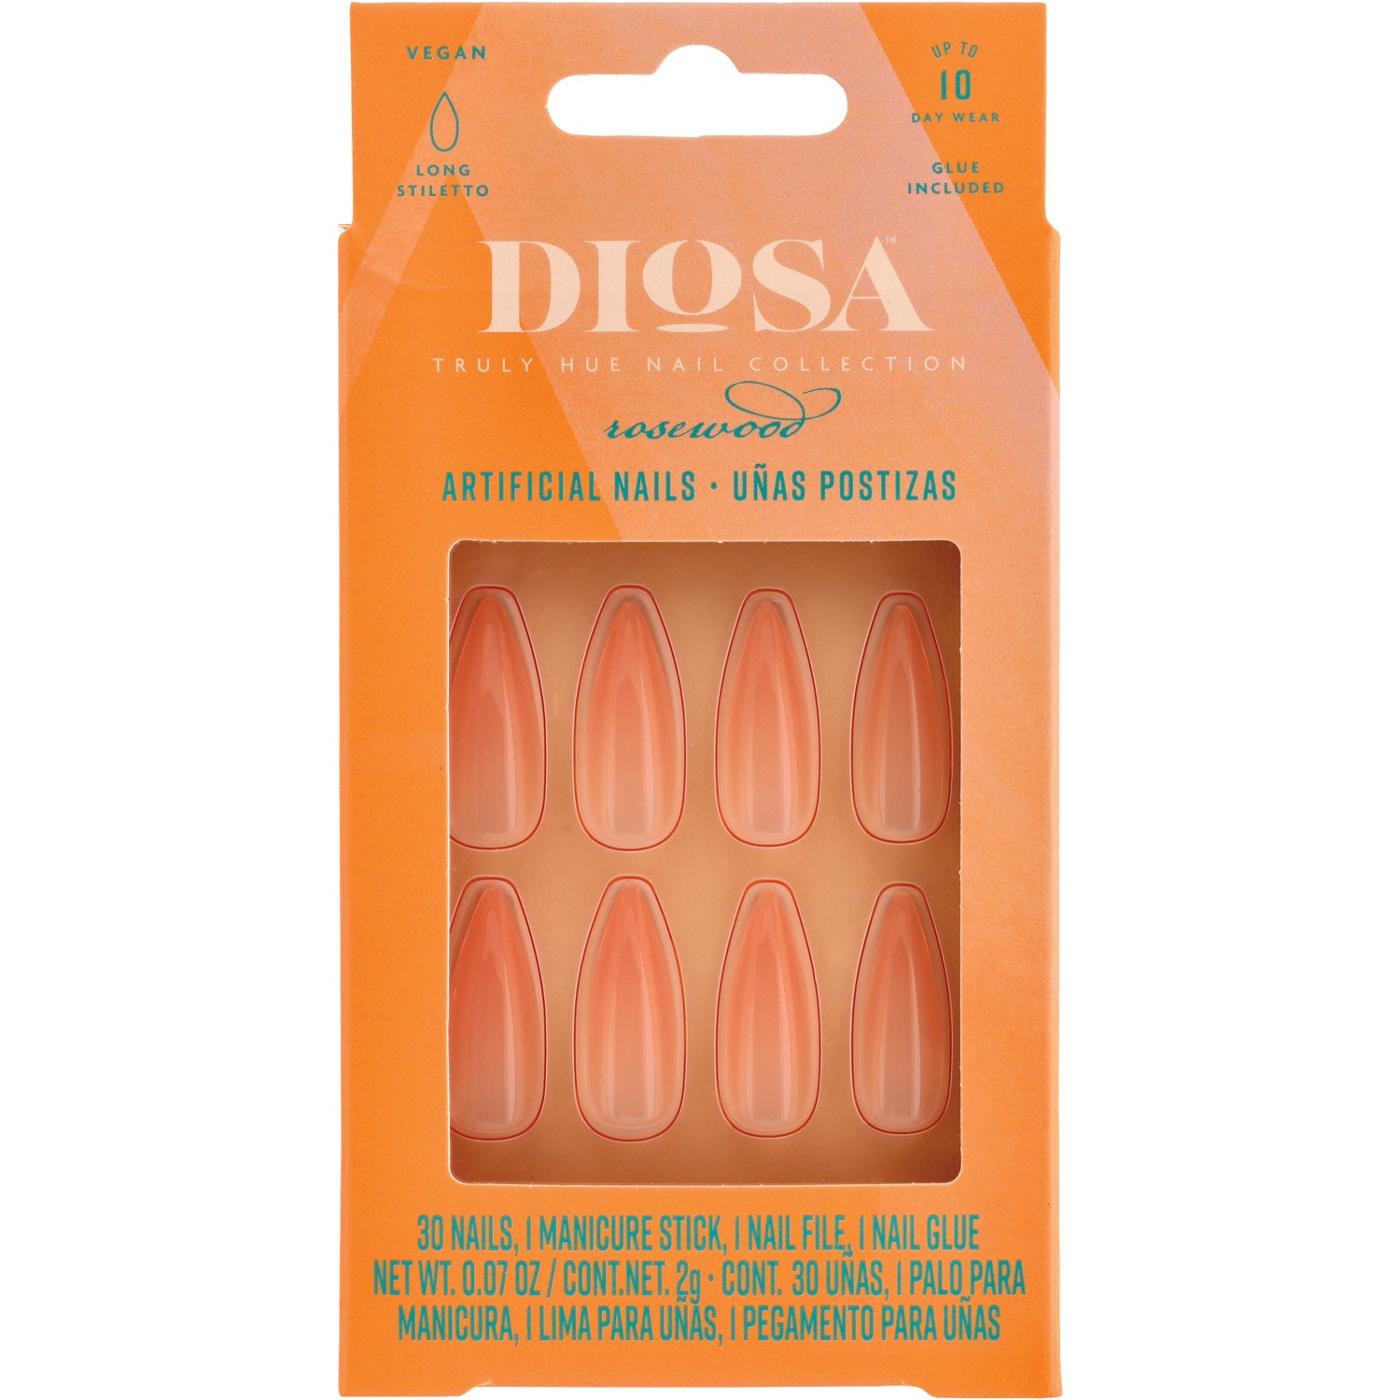 Diosa Long Stiletto Artificial Nails – Truly Hue Rosewood; image 1 of 6